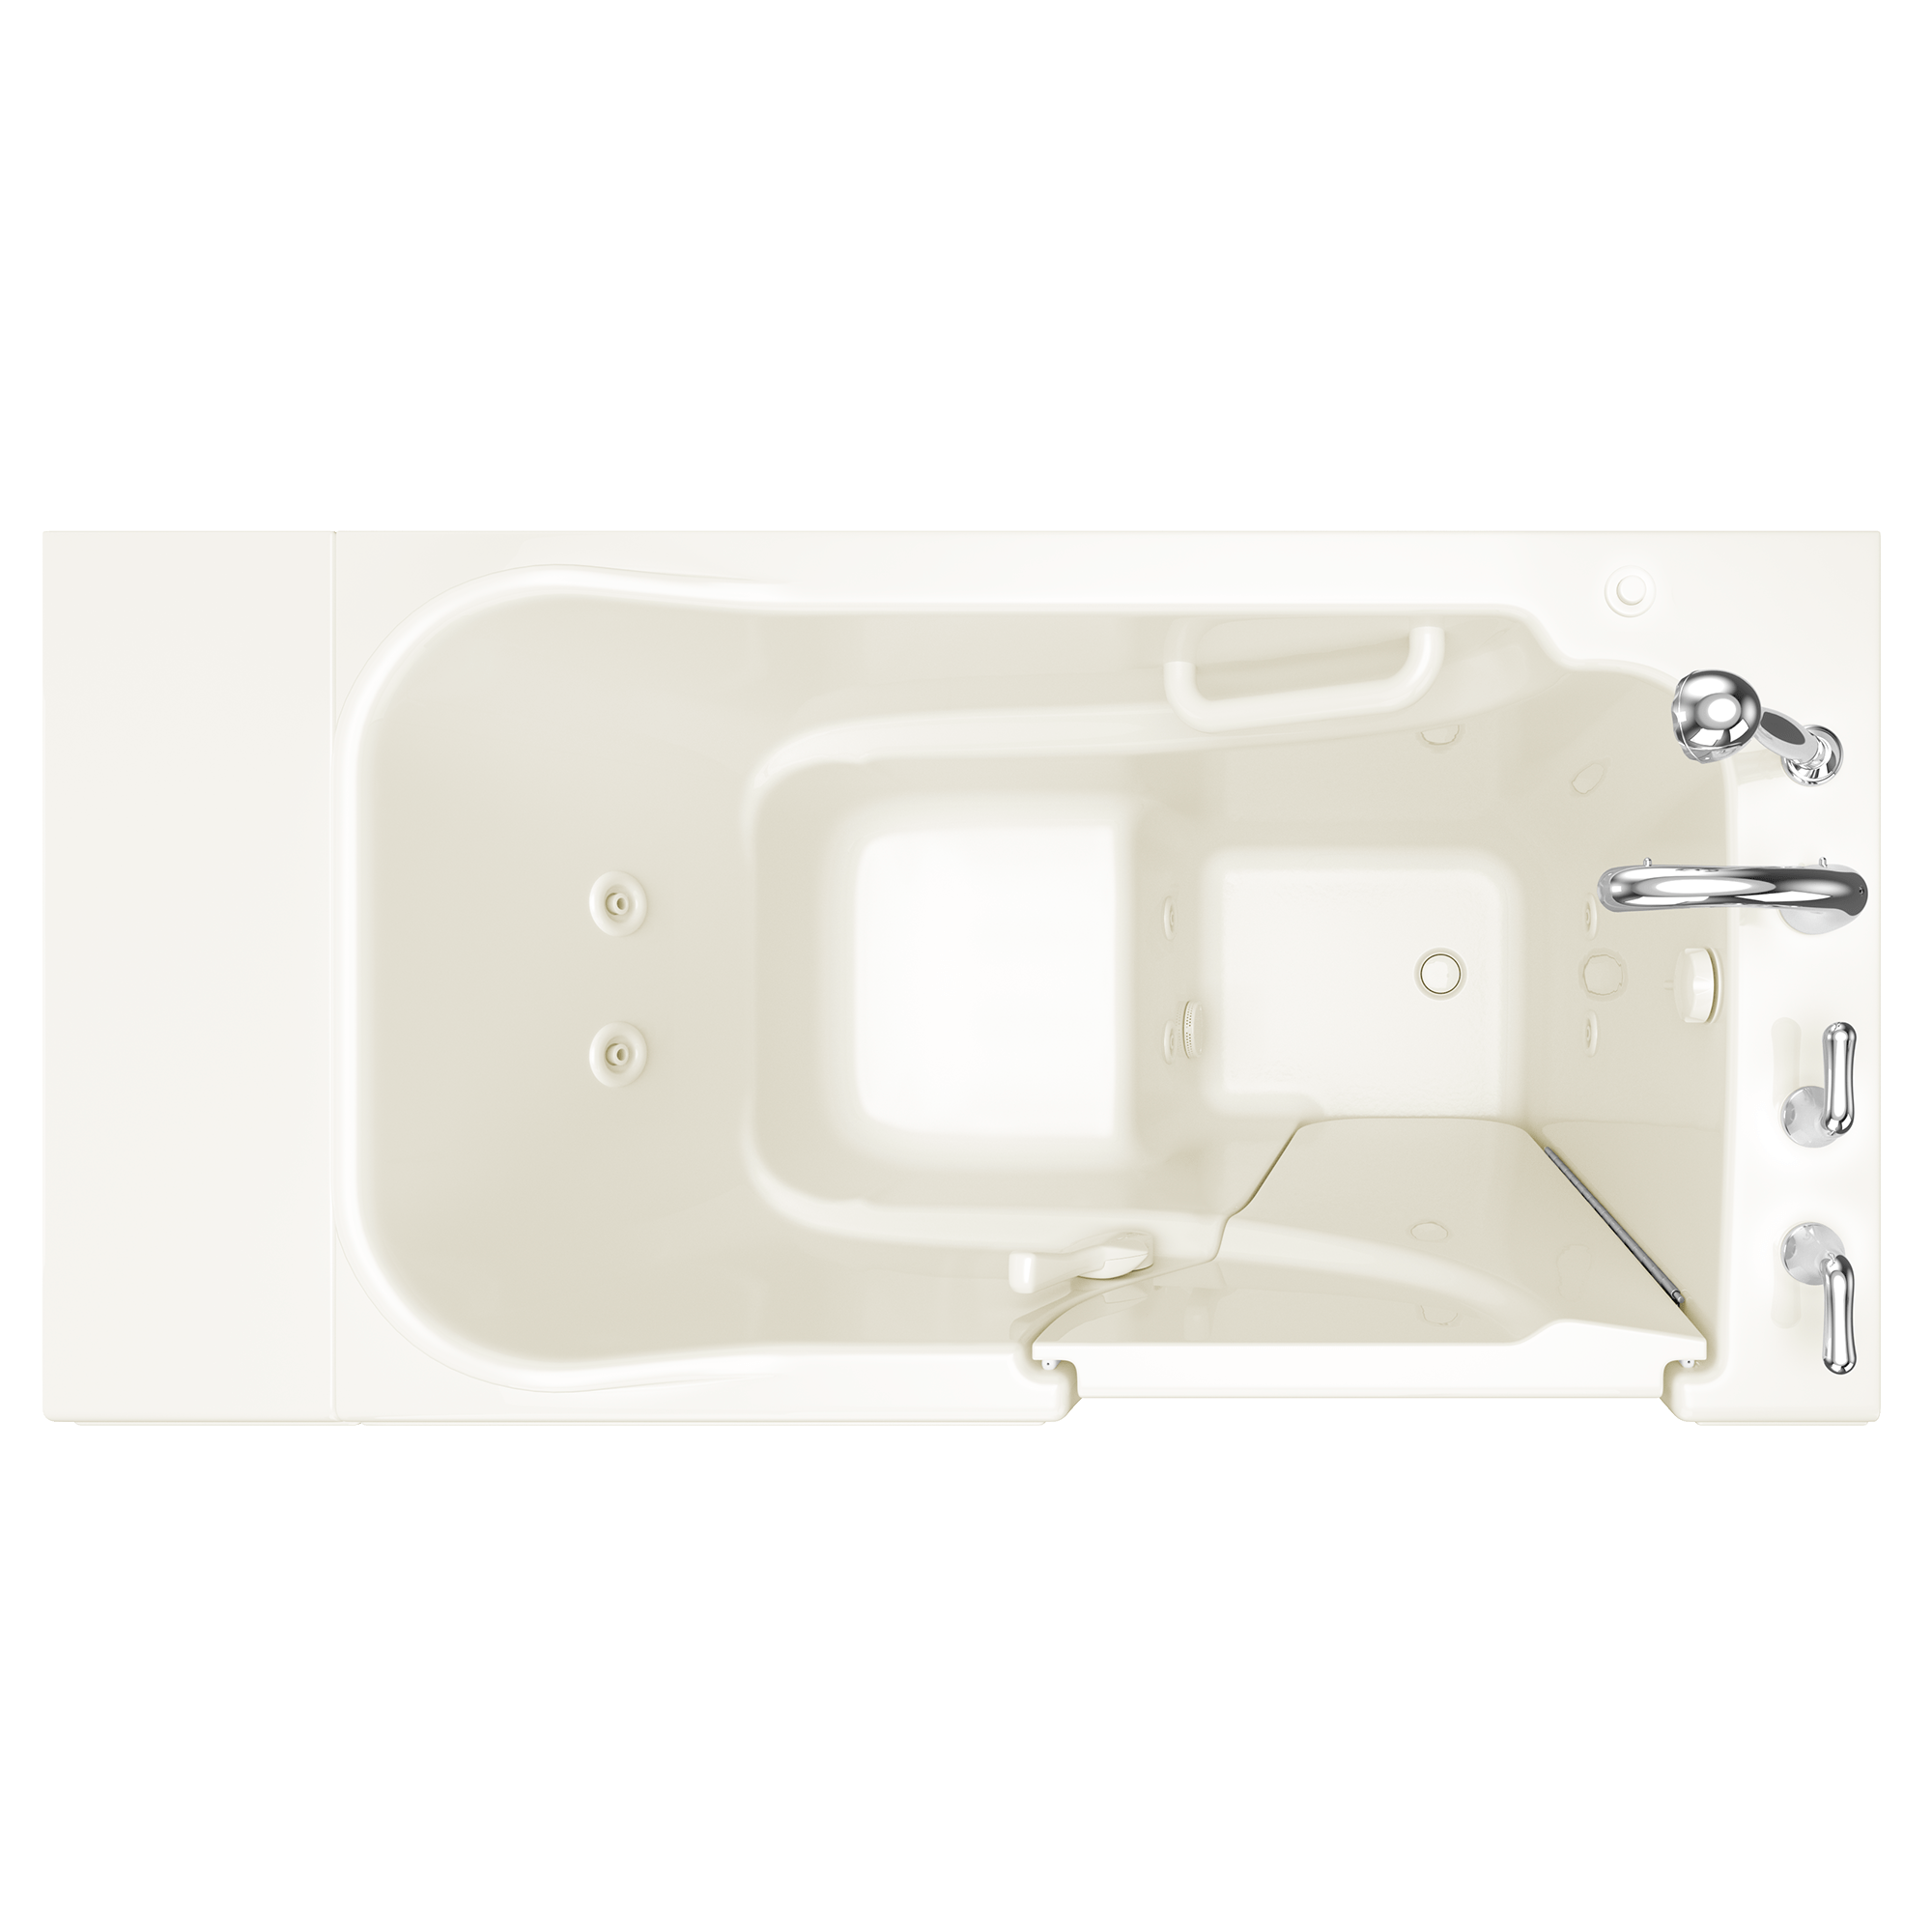 Gelcoat Entry Series 52 x 30-Inch Walk-In Tub With Whirlpool System – Right-Hand Drain With Faucet